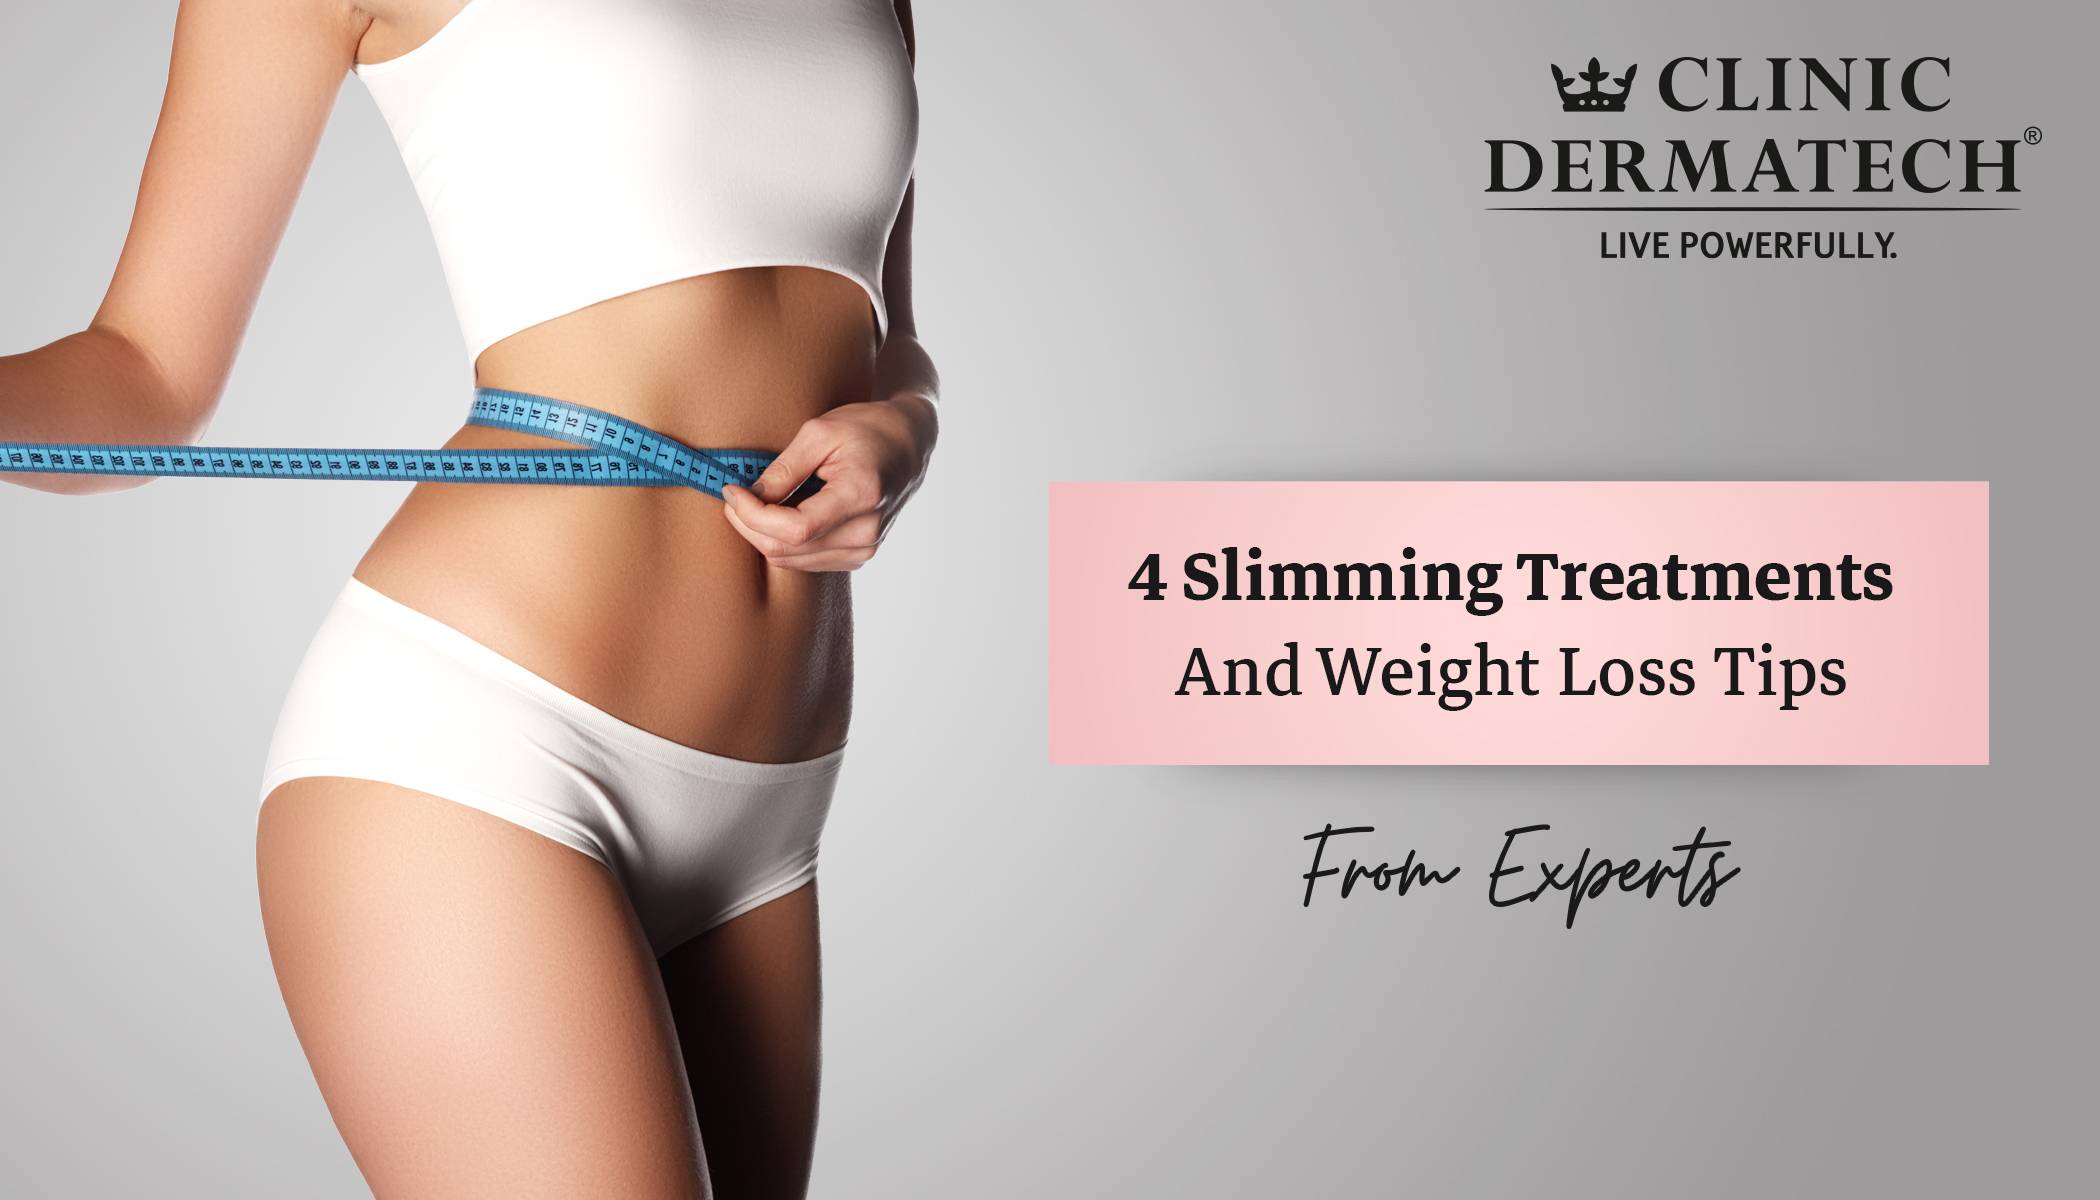 Few Important Things You Should Know About Slimming Treatment